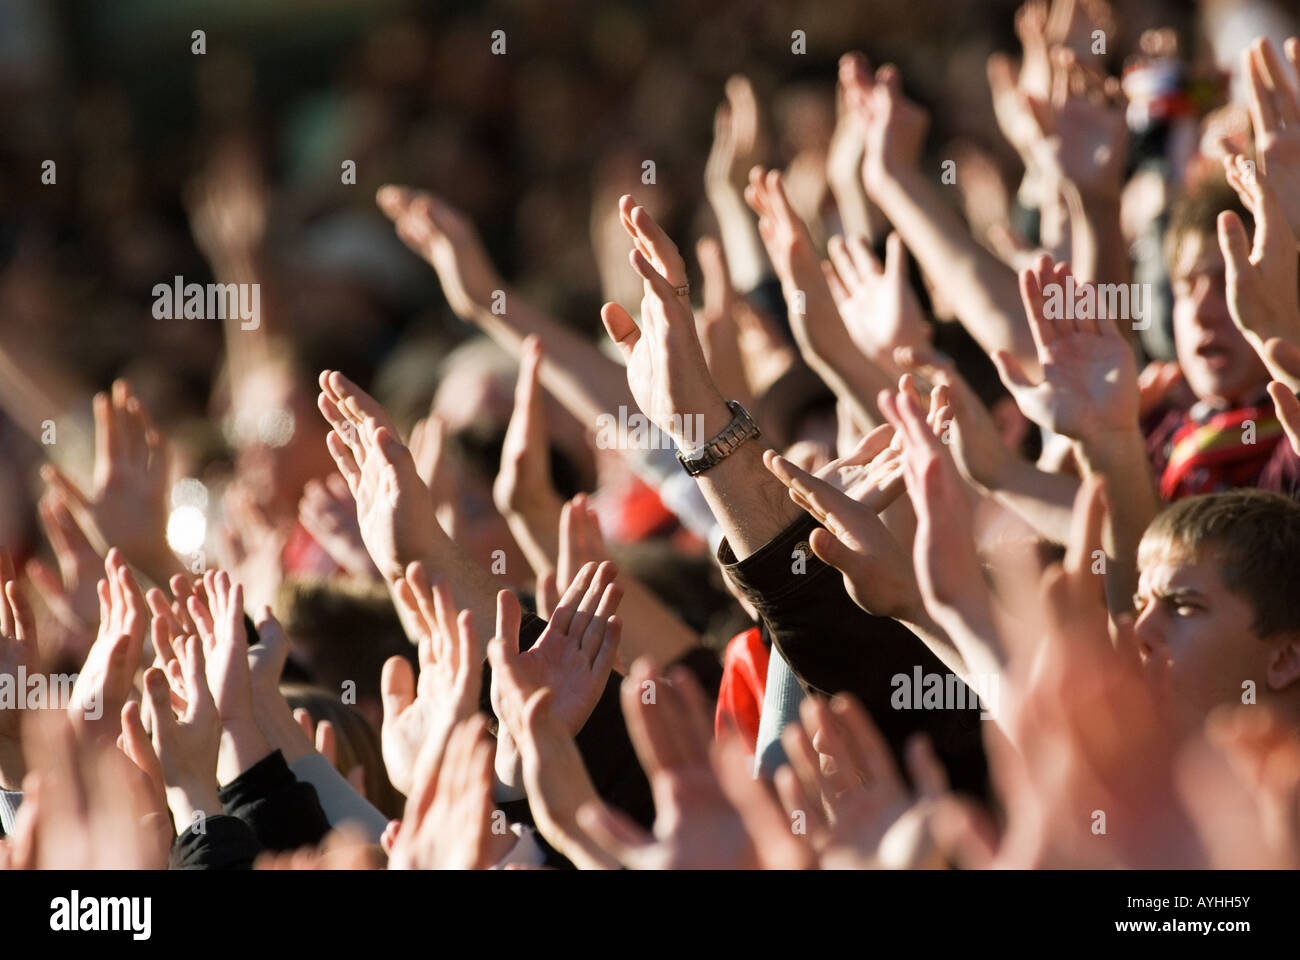 football fans wave their hands Stock Photo